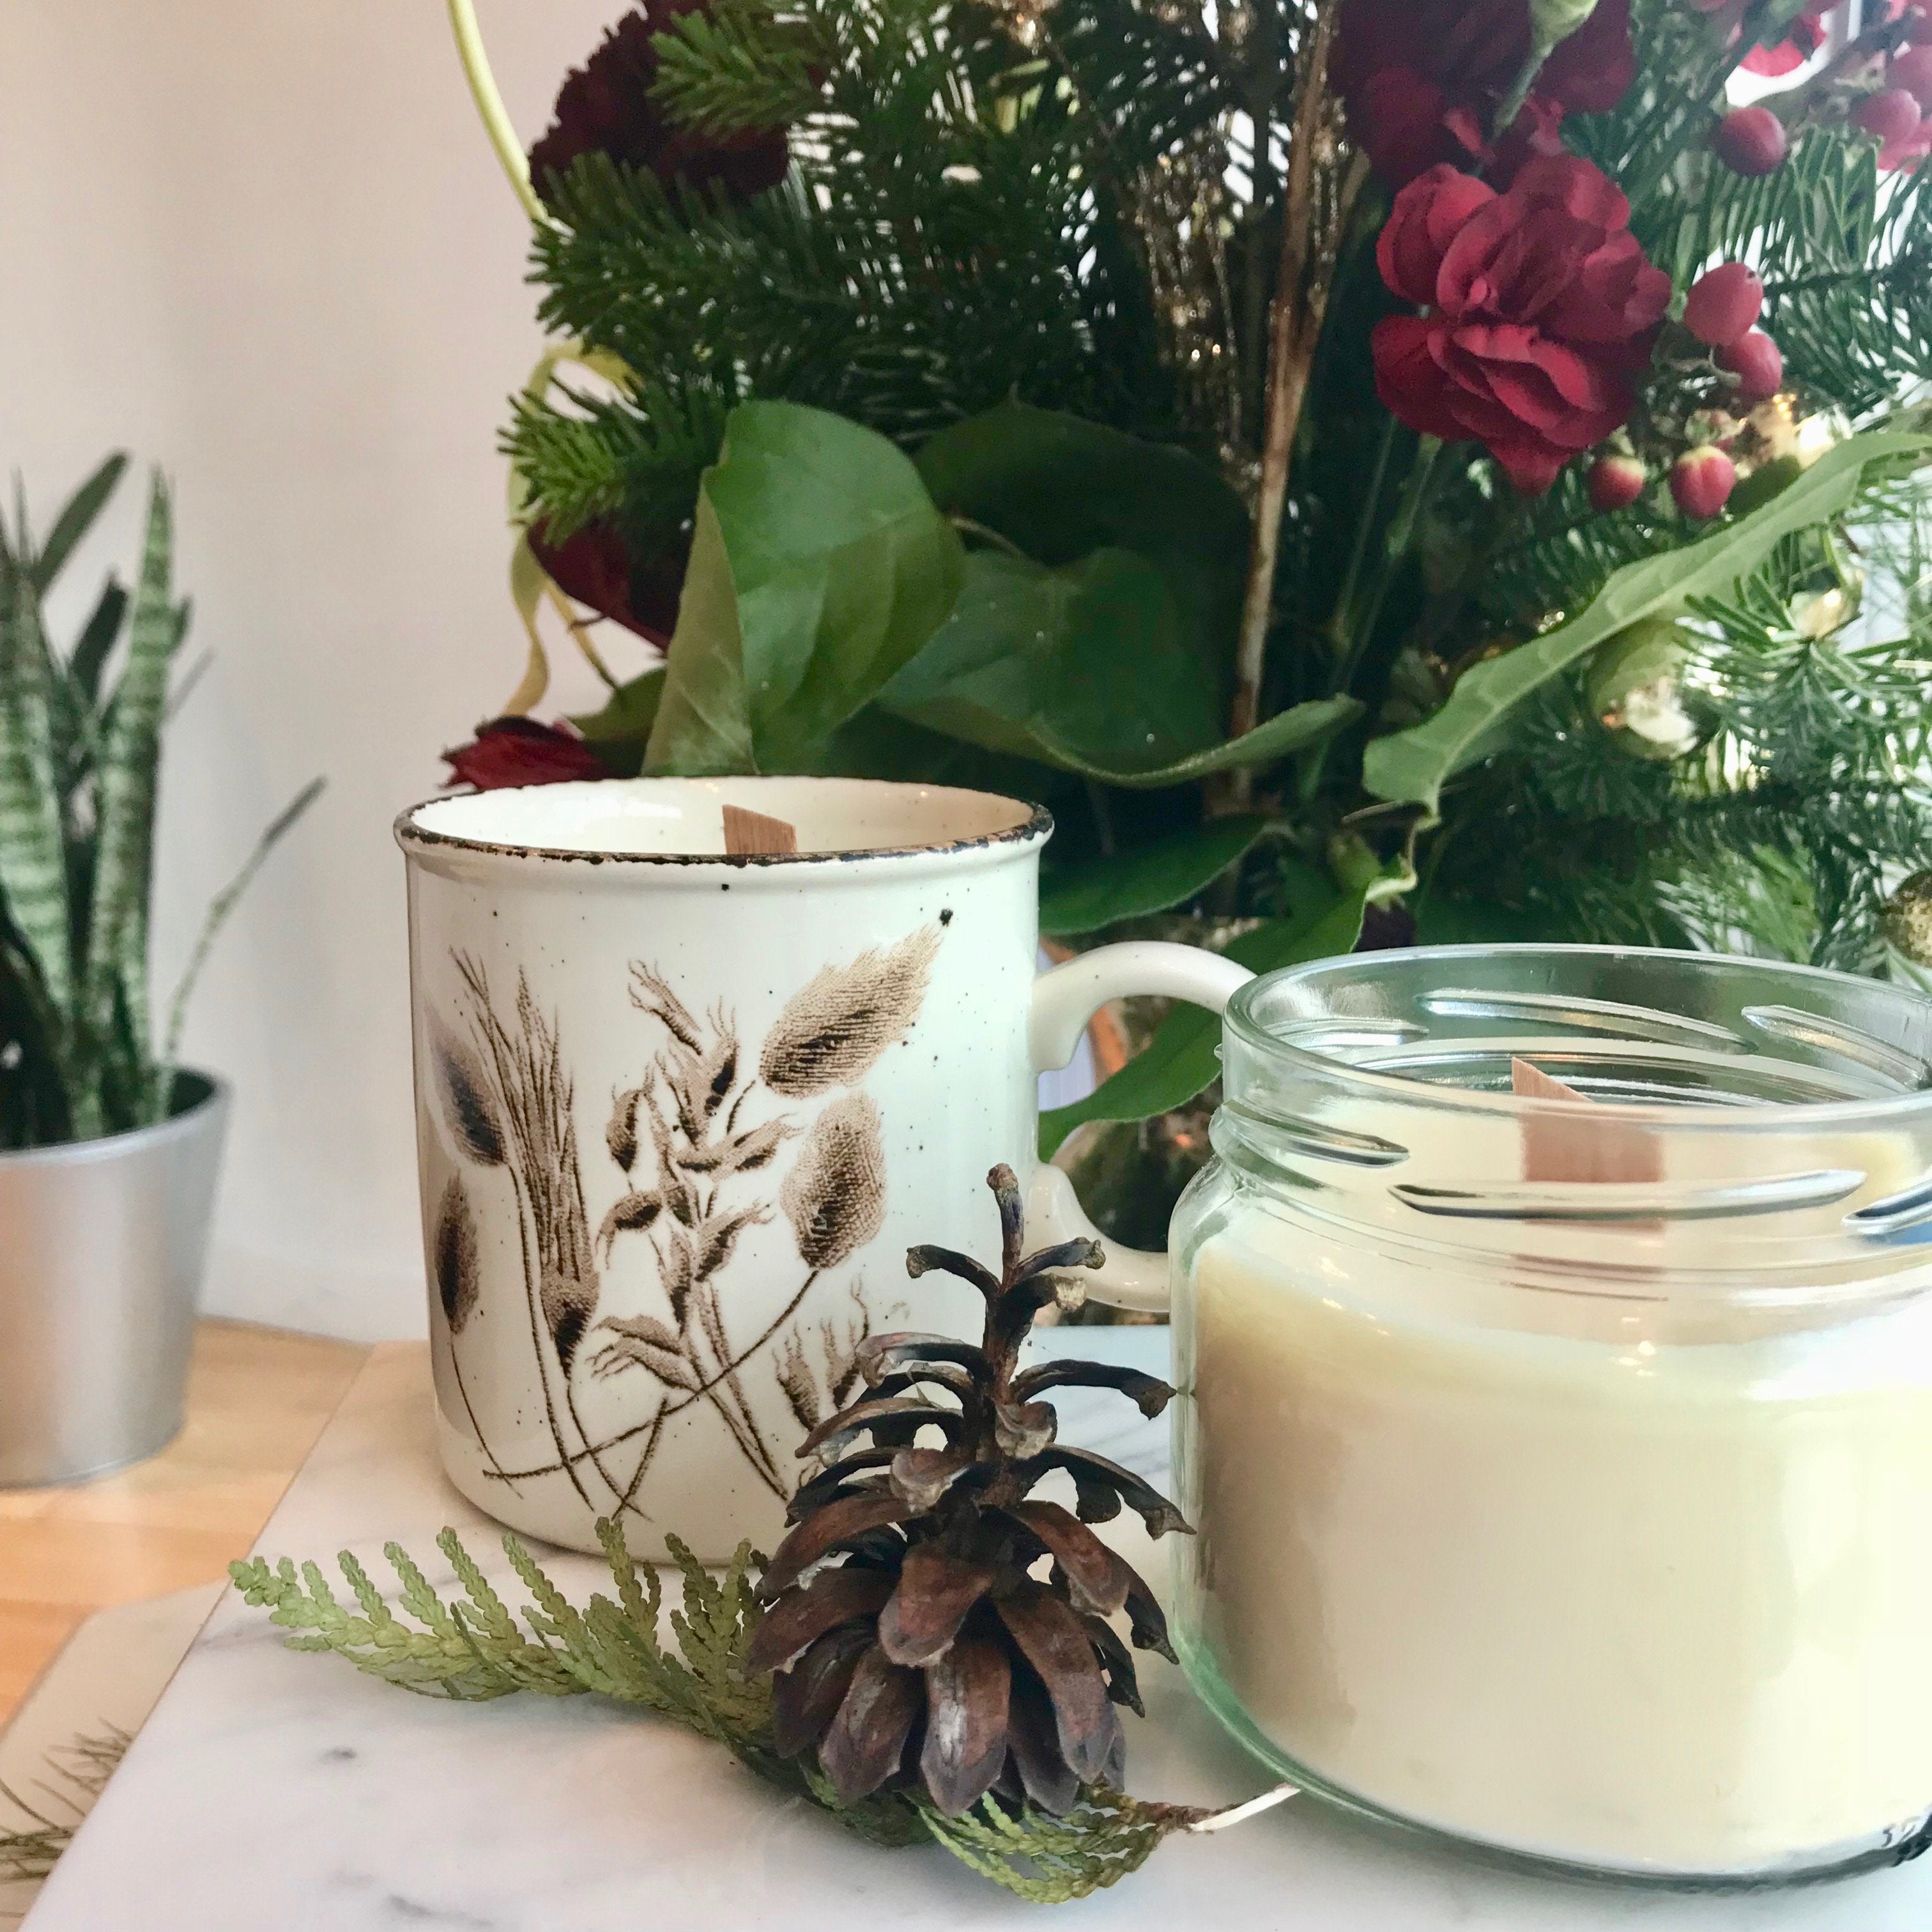 DIY Holiday Gifts: Aromatherapy Candles by Cassandra Bradshaw